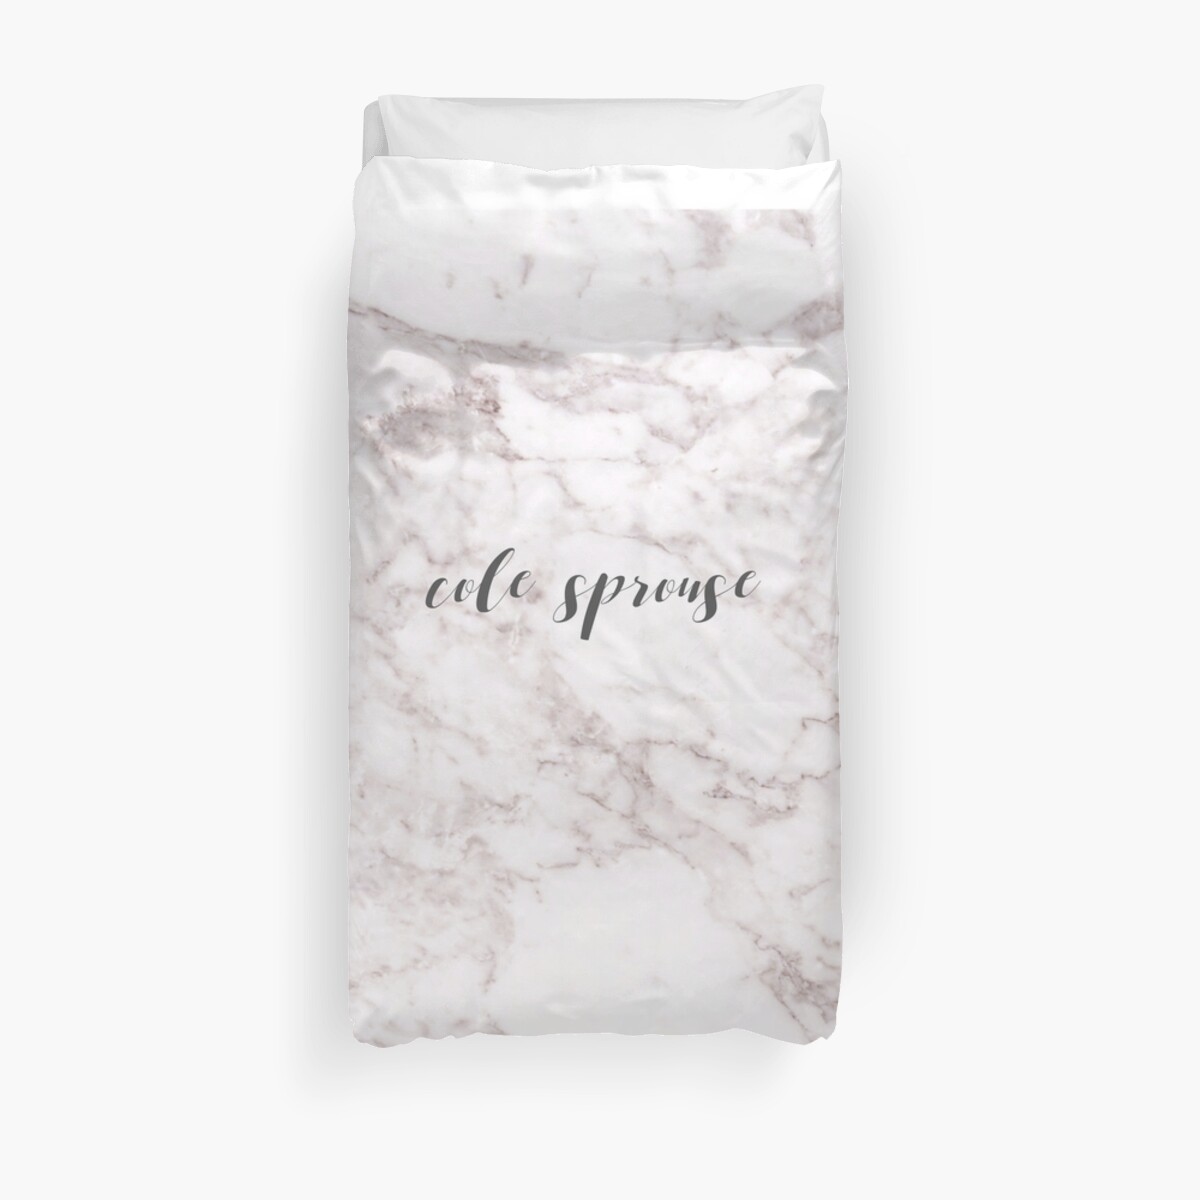 Cole Sprouse Duvet Cover